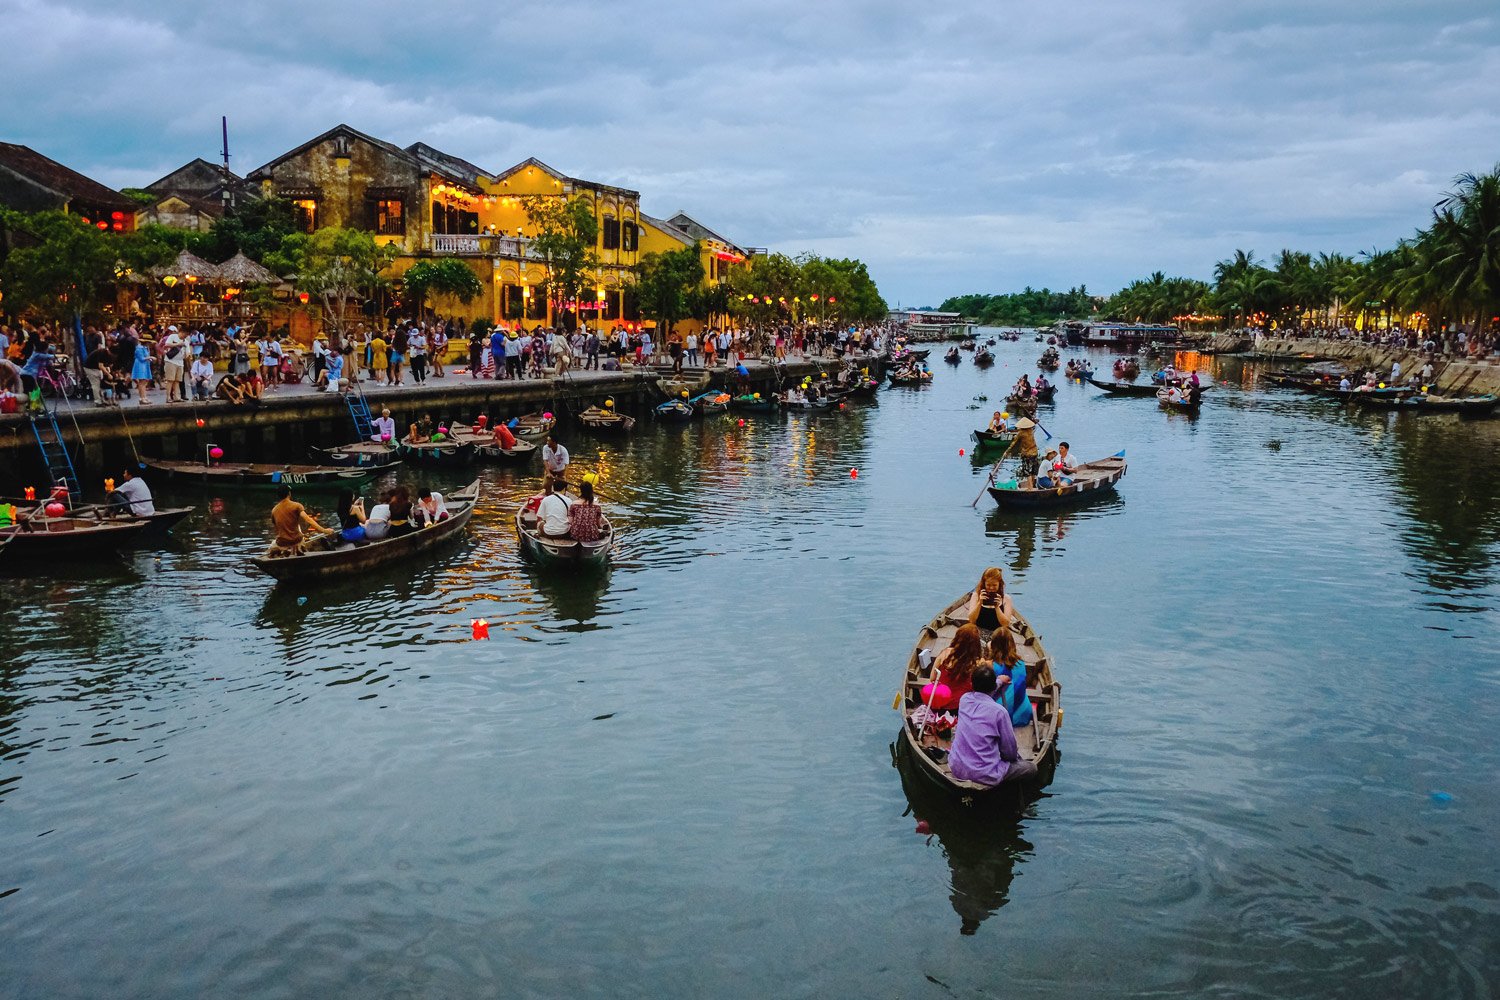 Visiting Hoi An and learning to make flower lanterns is an activity that attracts visitors.